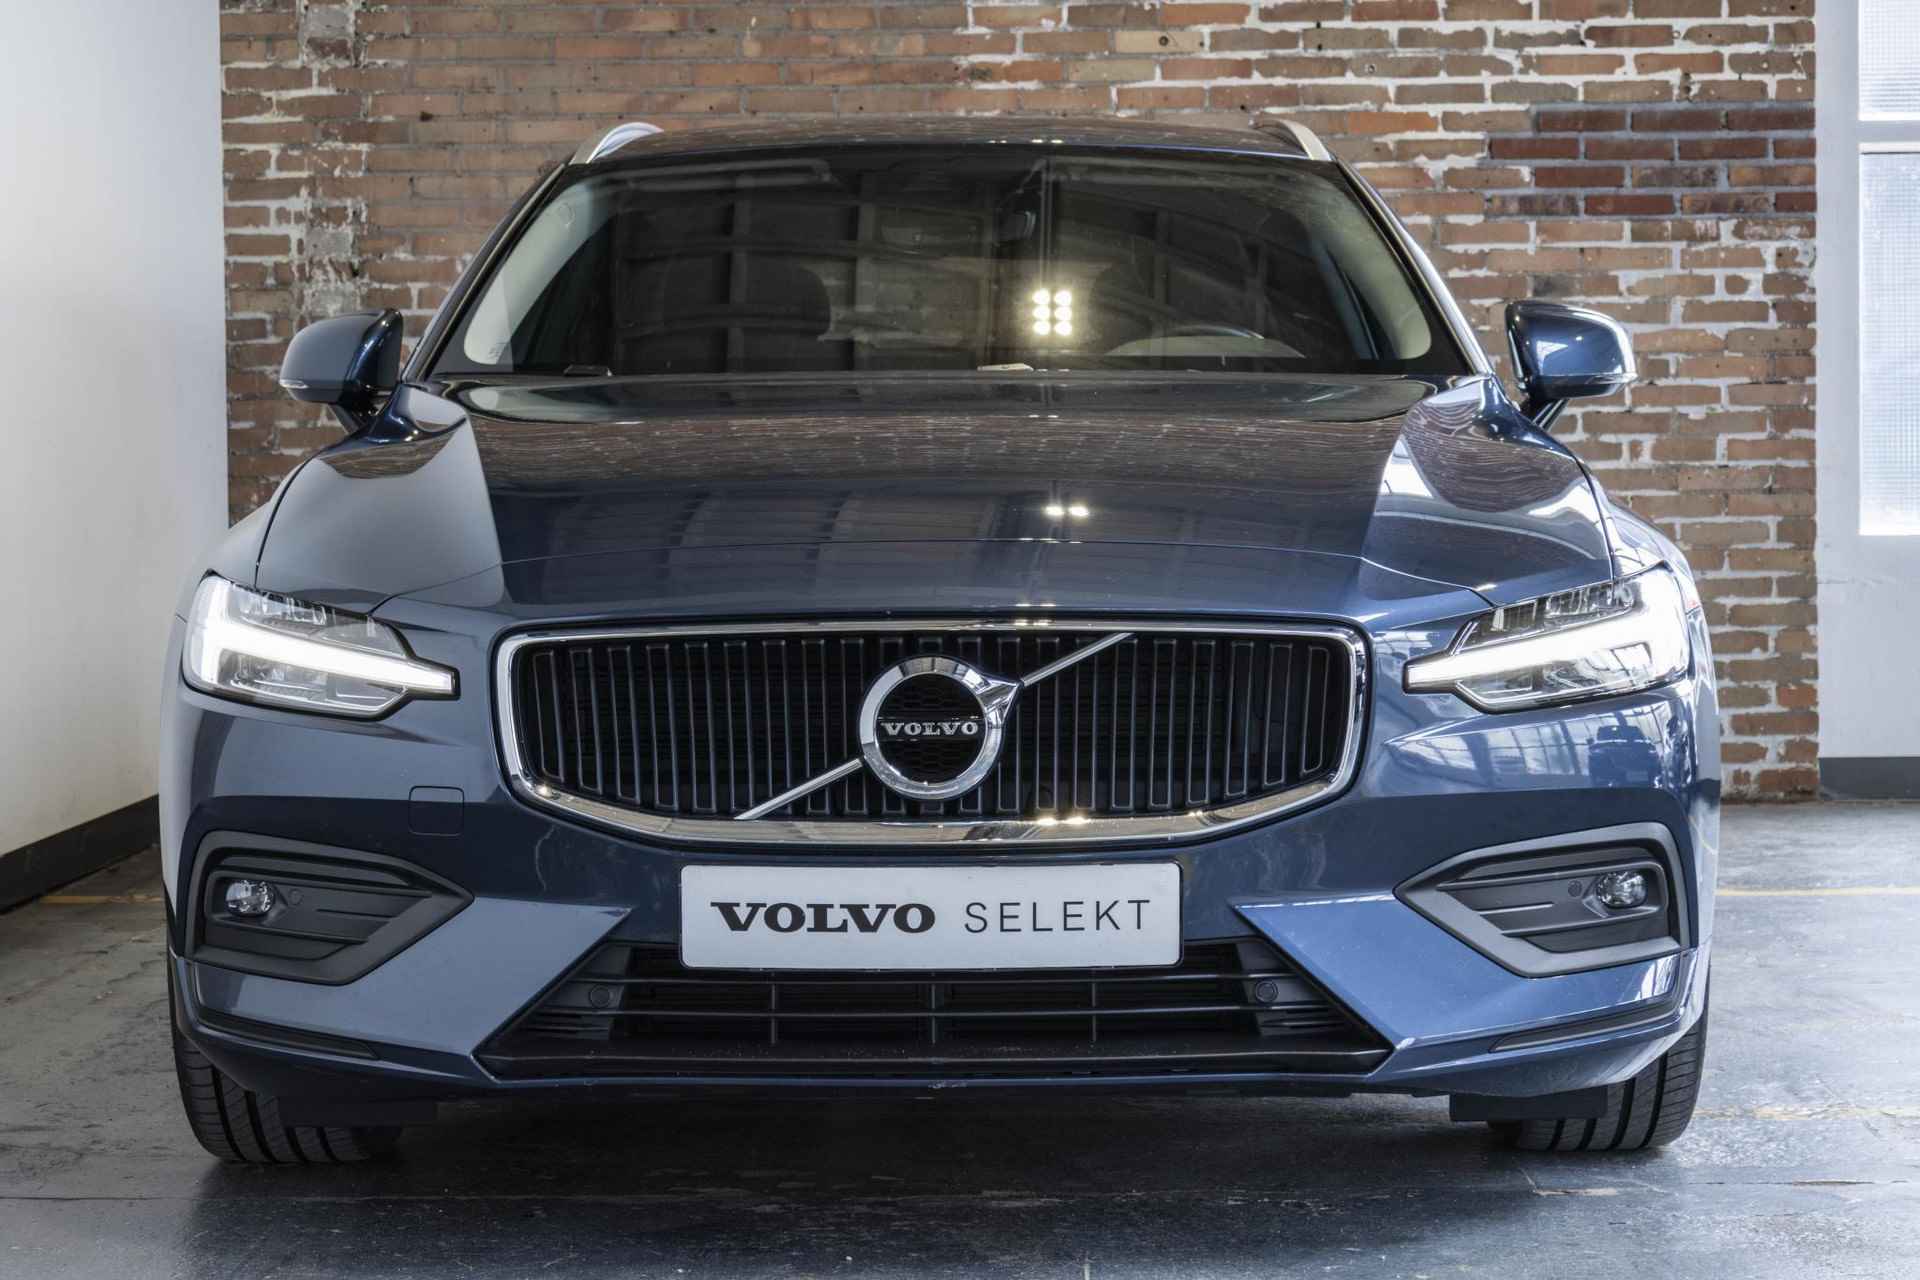 Volvo V60 B4 Automaat Business Pro | Blind Spot | Parkeercamera | Park Assist voor en achter | Adaptive cruise control | Extra getint glas | Keyless entree - 9/40